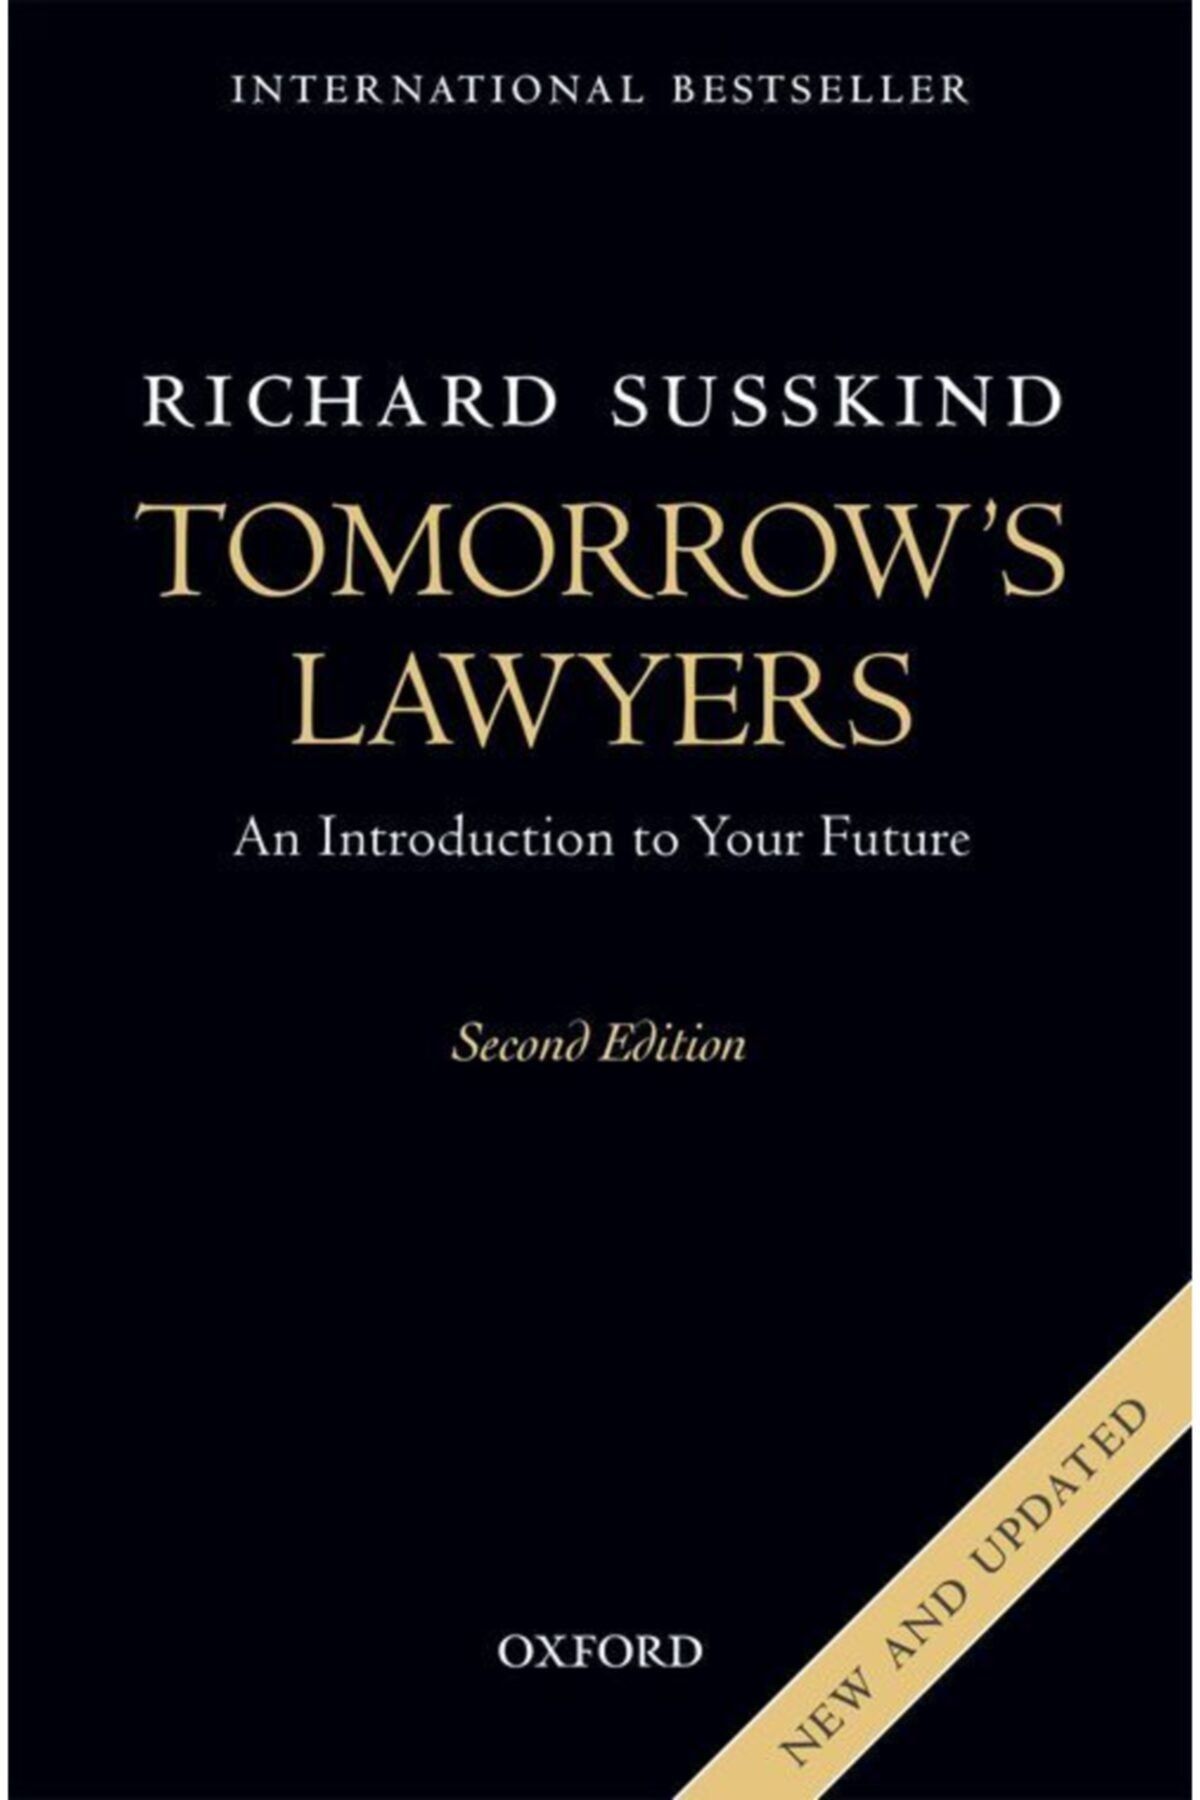 OXFORD UNIVERSITY PRESS Tomorrow's Lawyers: An Introduction To Your Future